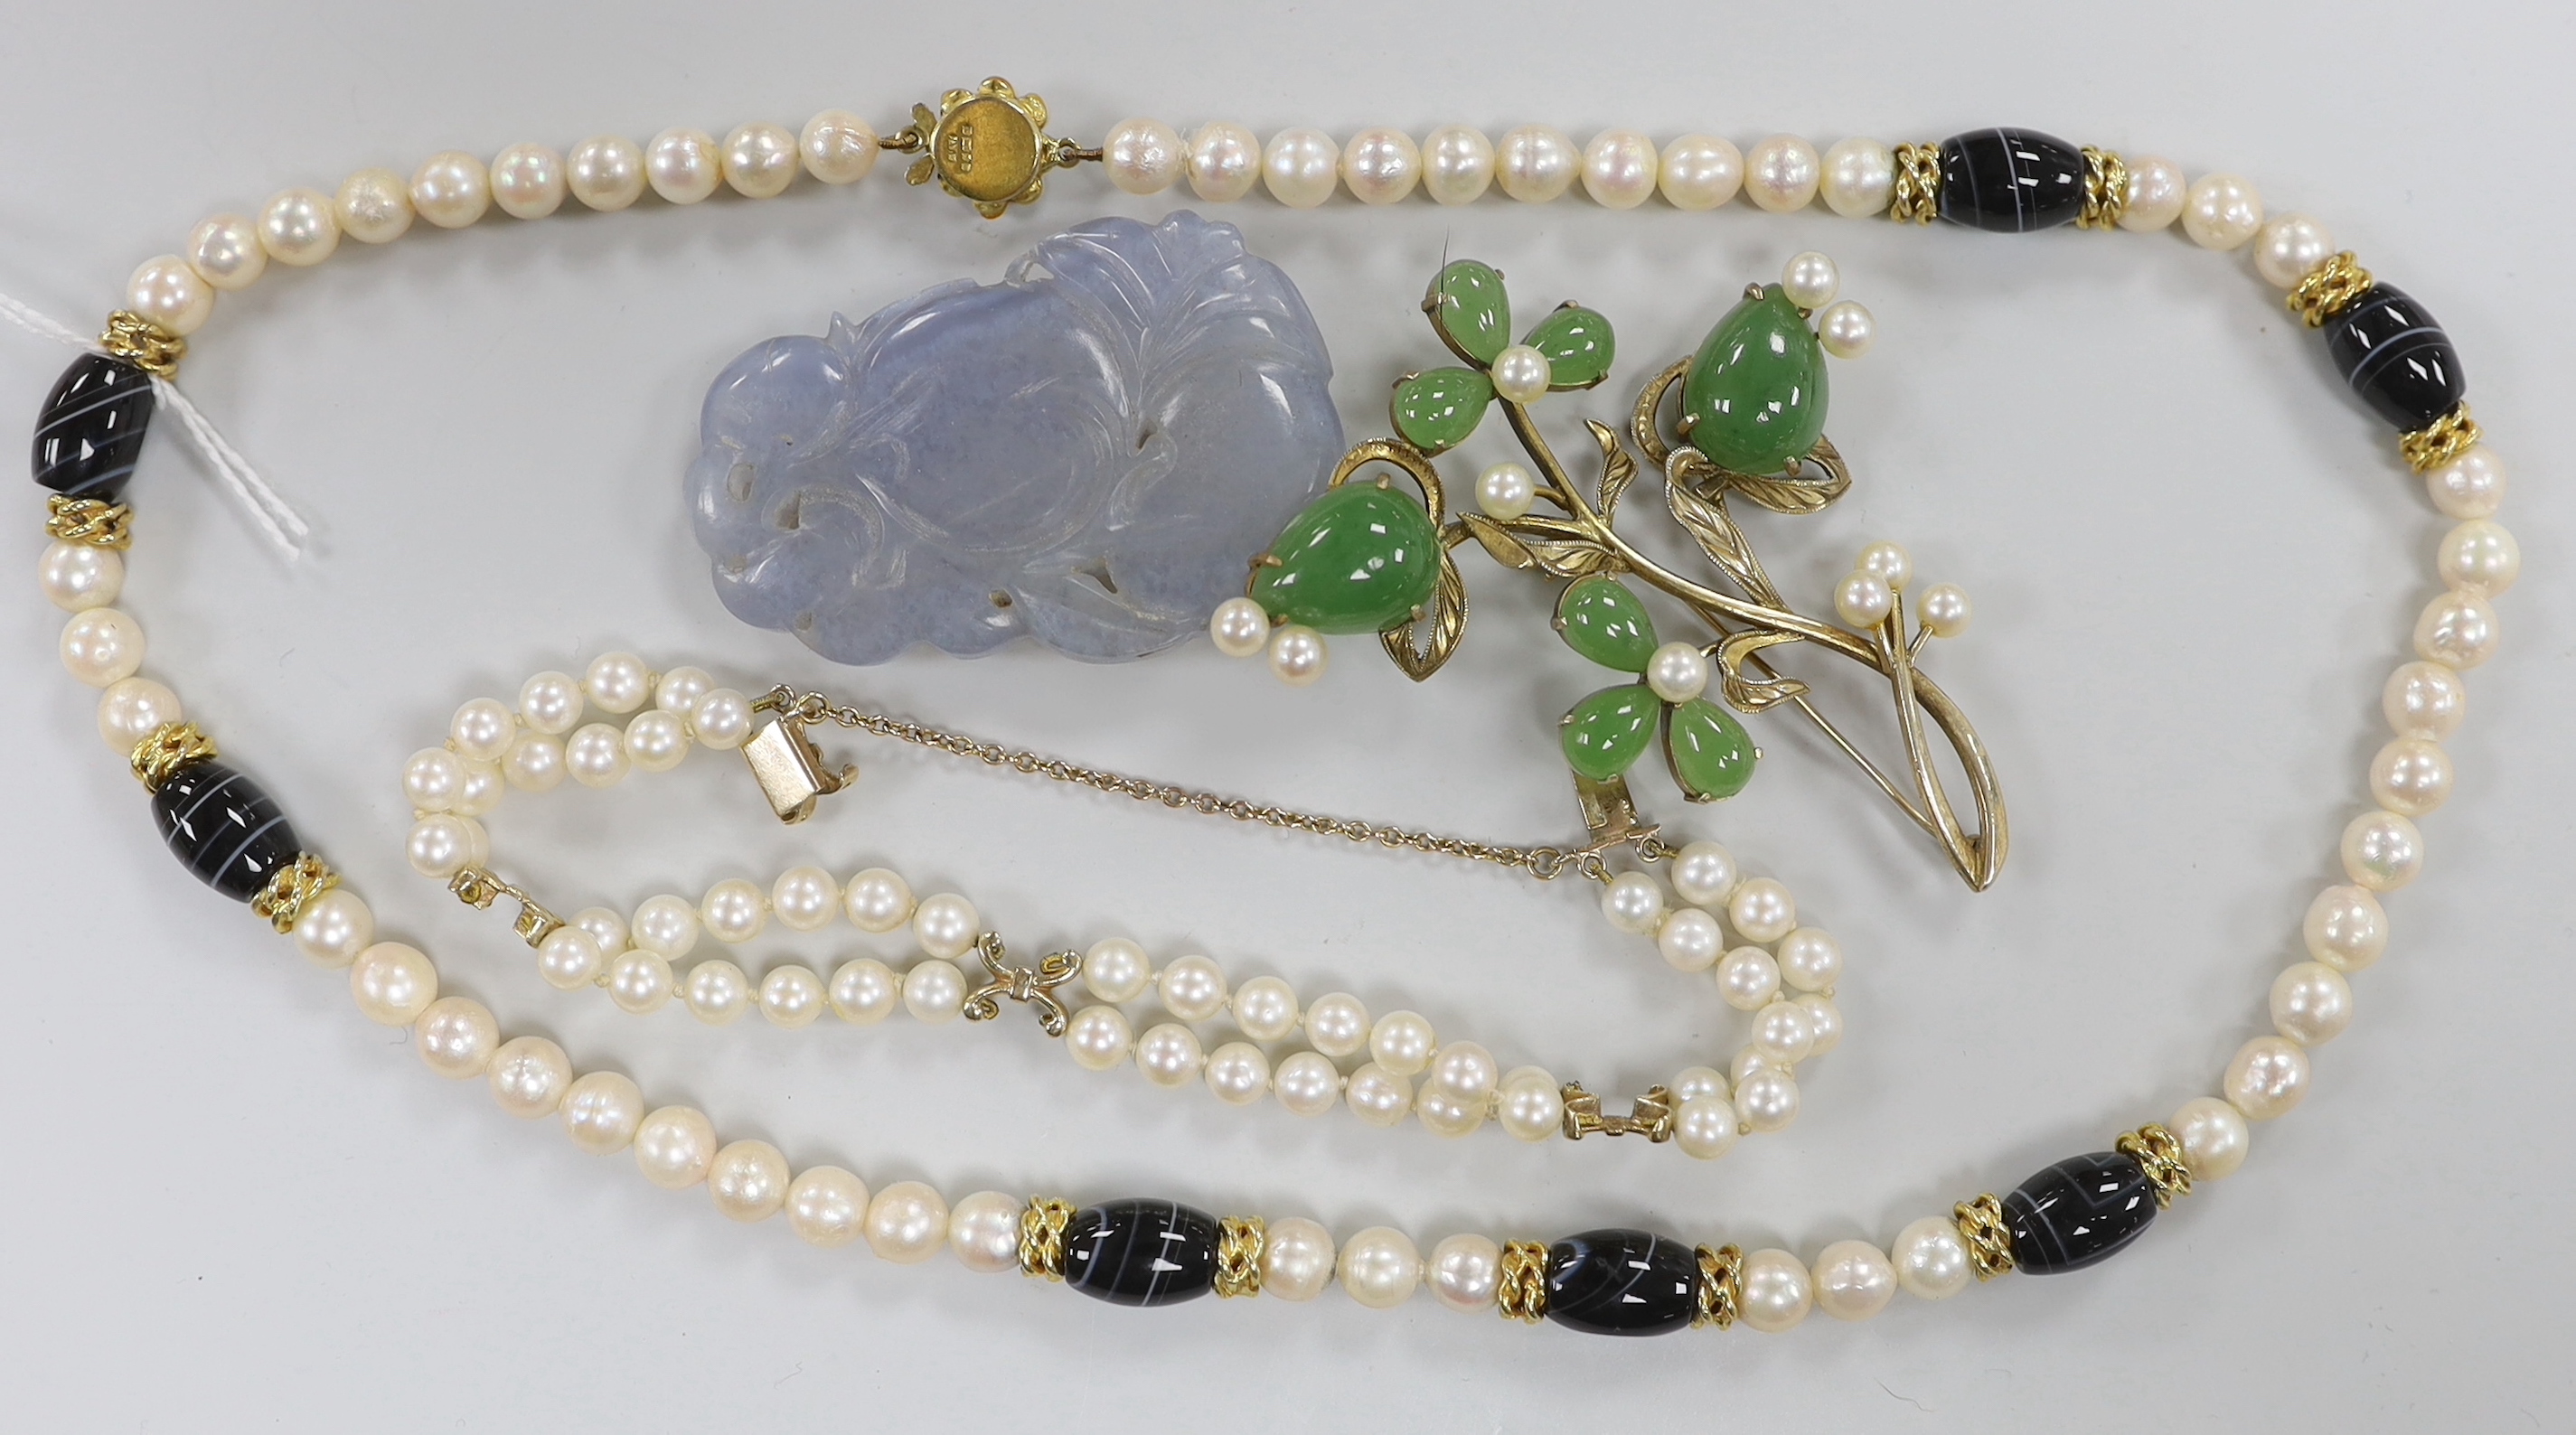 A modern single strand cultured pearl and agate bead necklace with 9ct gold and cultured pearl cluster set clasp and yellow metal spacers, 48cm, a twin strand cultured pearl bracelet, jade carving and a brooch.